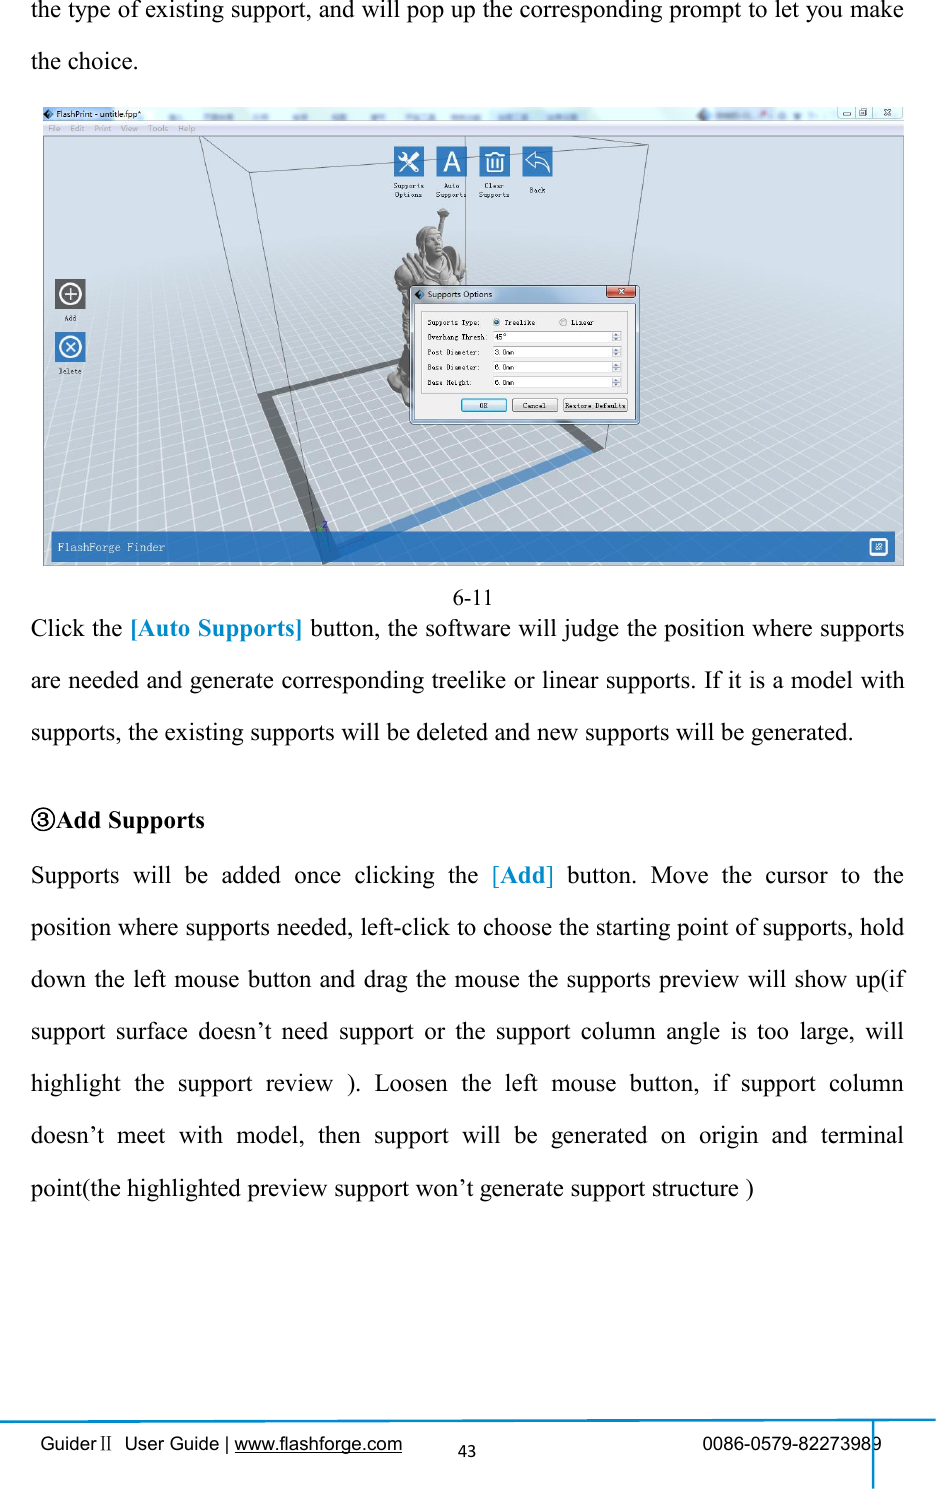 GuiderⅡUser Guide | www.flashforge.com 0086-0579-8227398943the type of existing support, and will pop up the corresponding prompt to let you makethe choice.②Auto SupportsClick the [Auto Supports] button, the software will judge the position where supportsare needed and generate corresponding treelike or linear supports. If it is a model withsupports, the existing supports will be deleted and new supports will be generated.③Add SupportsSupports will be added once clicking the [Add]button. Move the cursor to theposition where supports needed, left-click to choose the starting point of supports, holddown the left mouse button and drag the mouse the supports preview will show up(ifsupport surface doesn’t need support or the support column angle is too large, willhighlight the support review ). Loosen the left mouse button, if support columndoesn’t meet with model, then support will be generated on origin and terminalpoint(the highlighted preview support won’t generate support structure )6-11